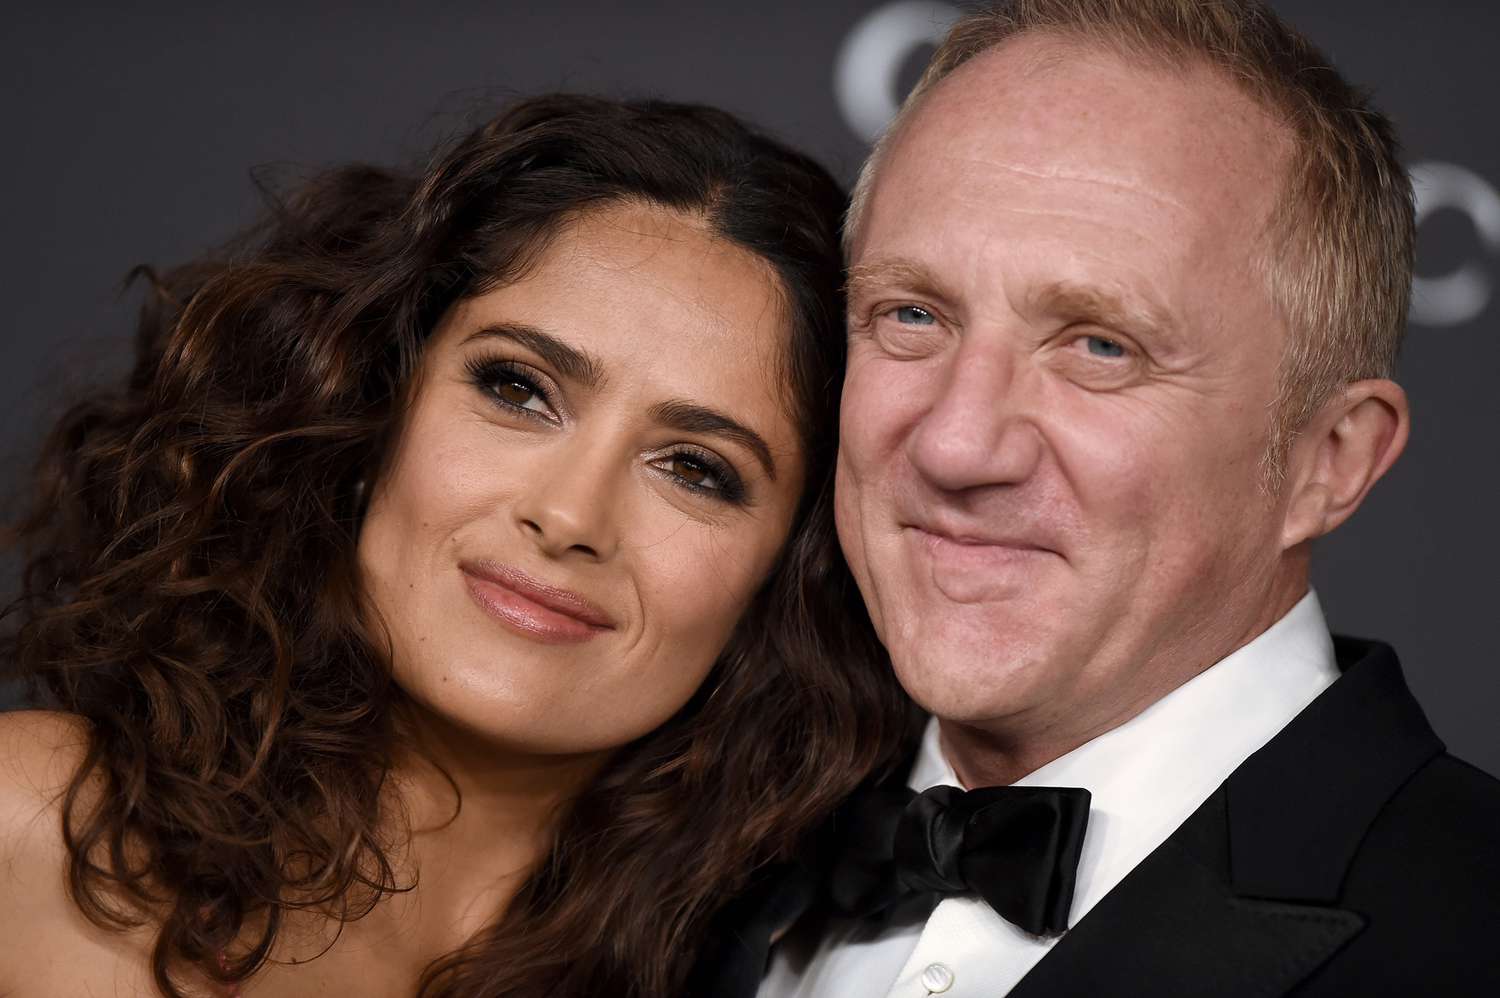 Salma Hayek Pinault Biography: Age, Net Worth, Siblings, Husband, Movies, Family, Pictures, Children, Wiki, Instagram, Parents